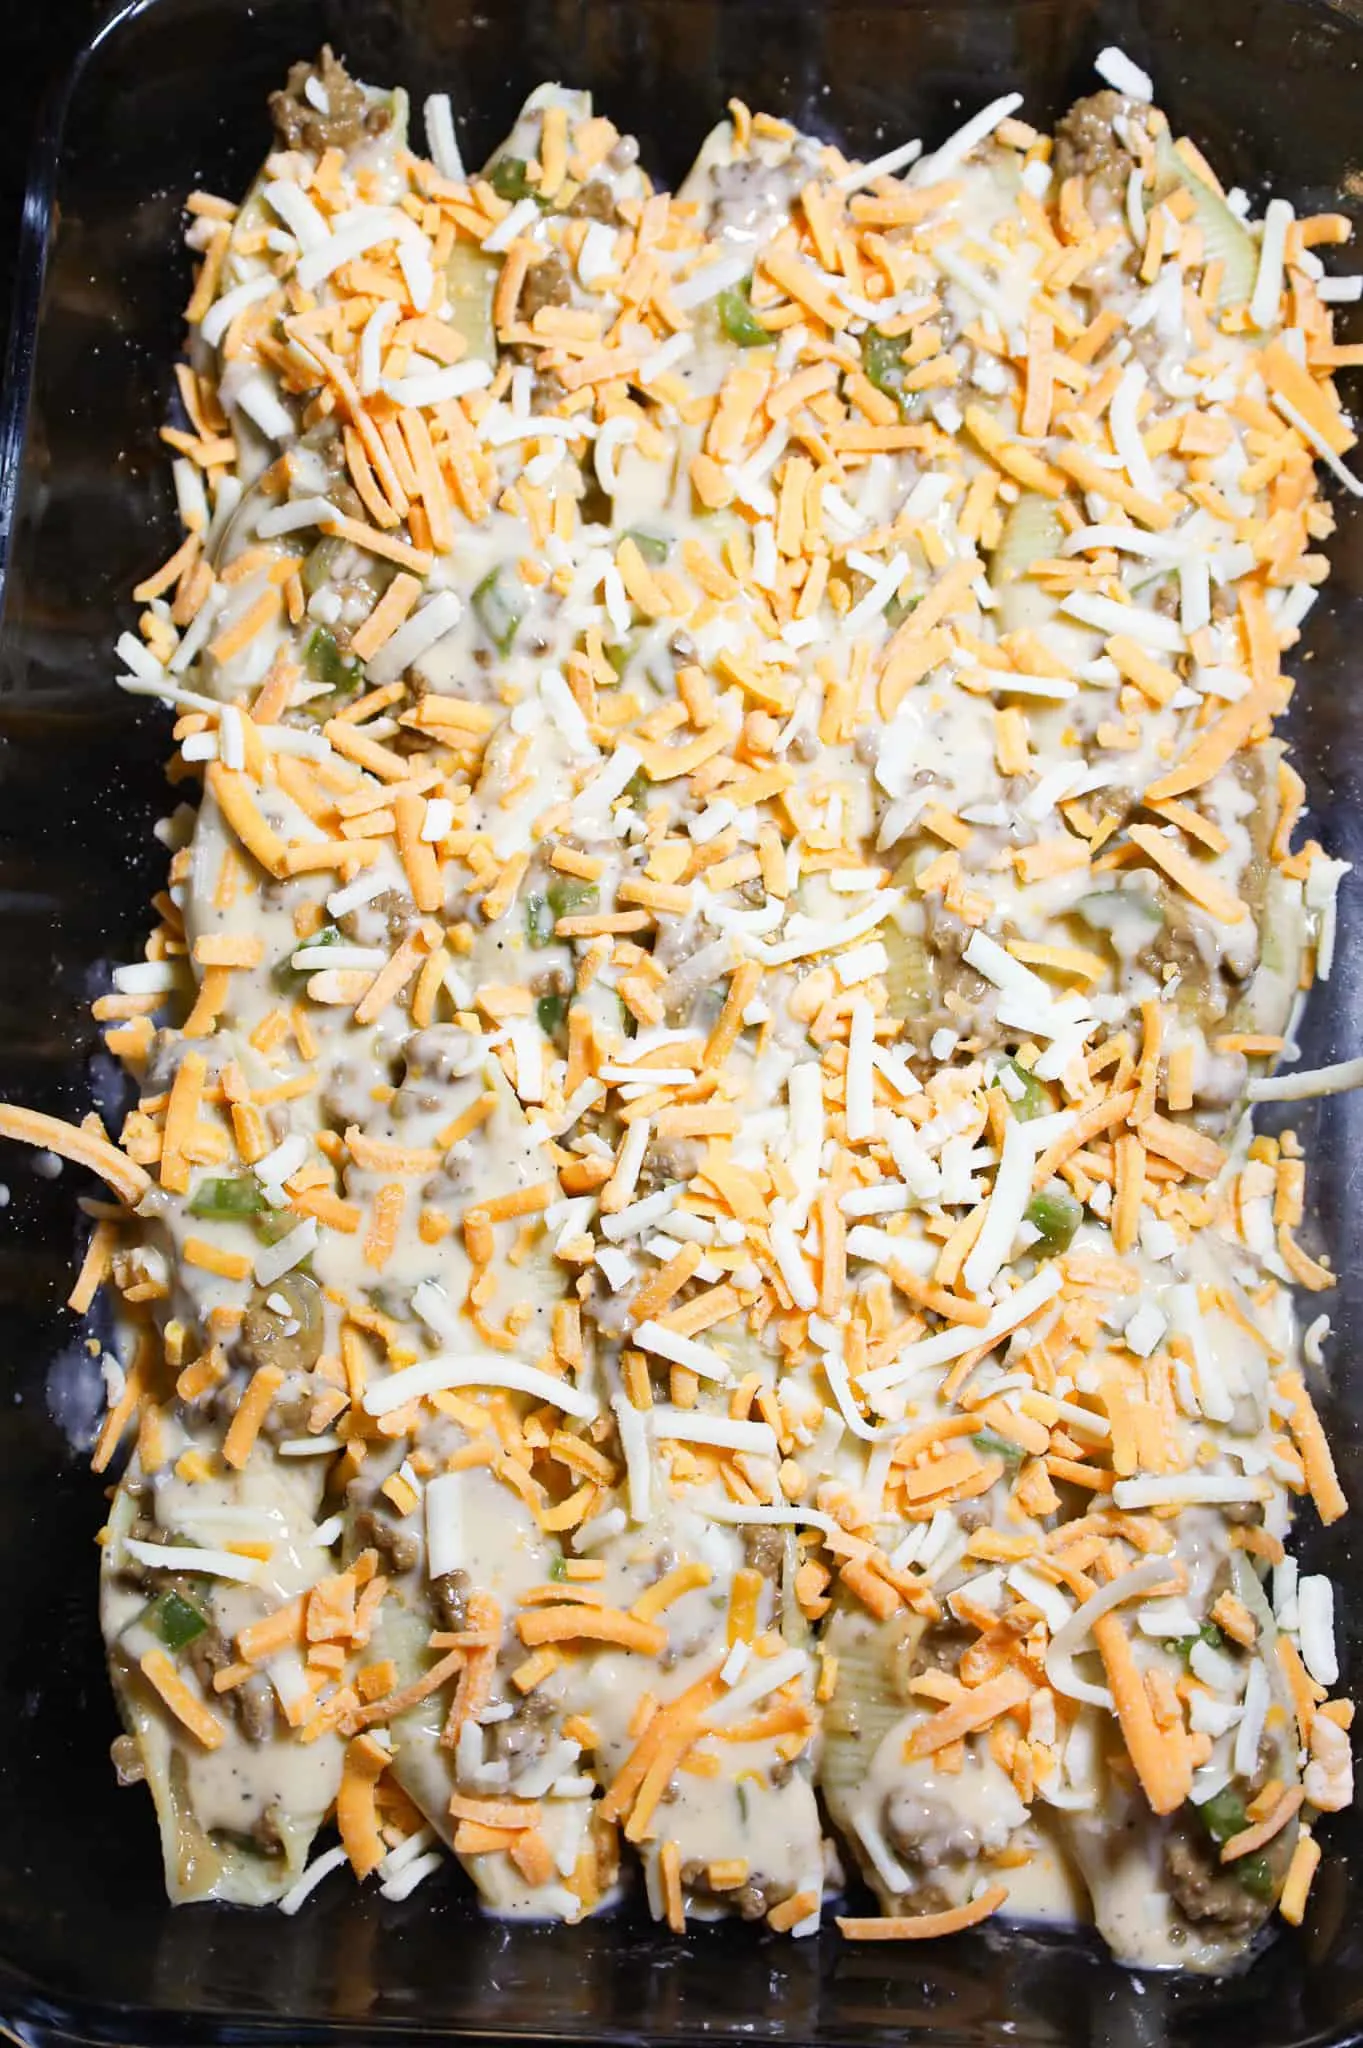 shredded cheddar cheese on top of stuffed pasta shells in a baking dish